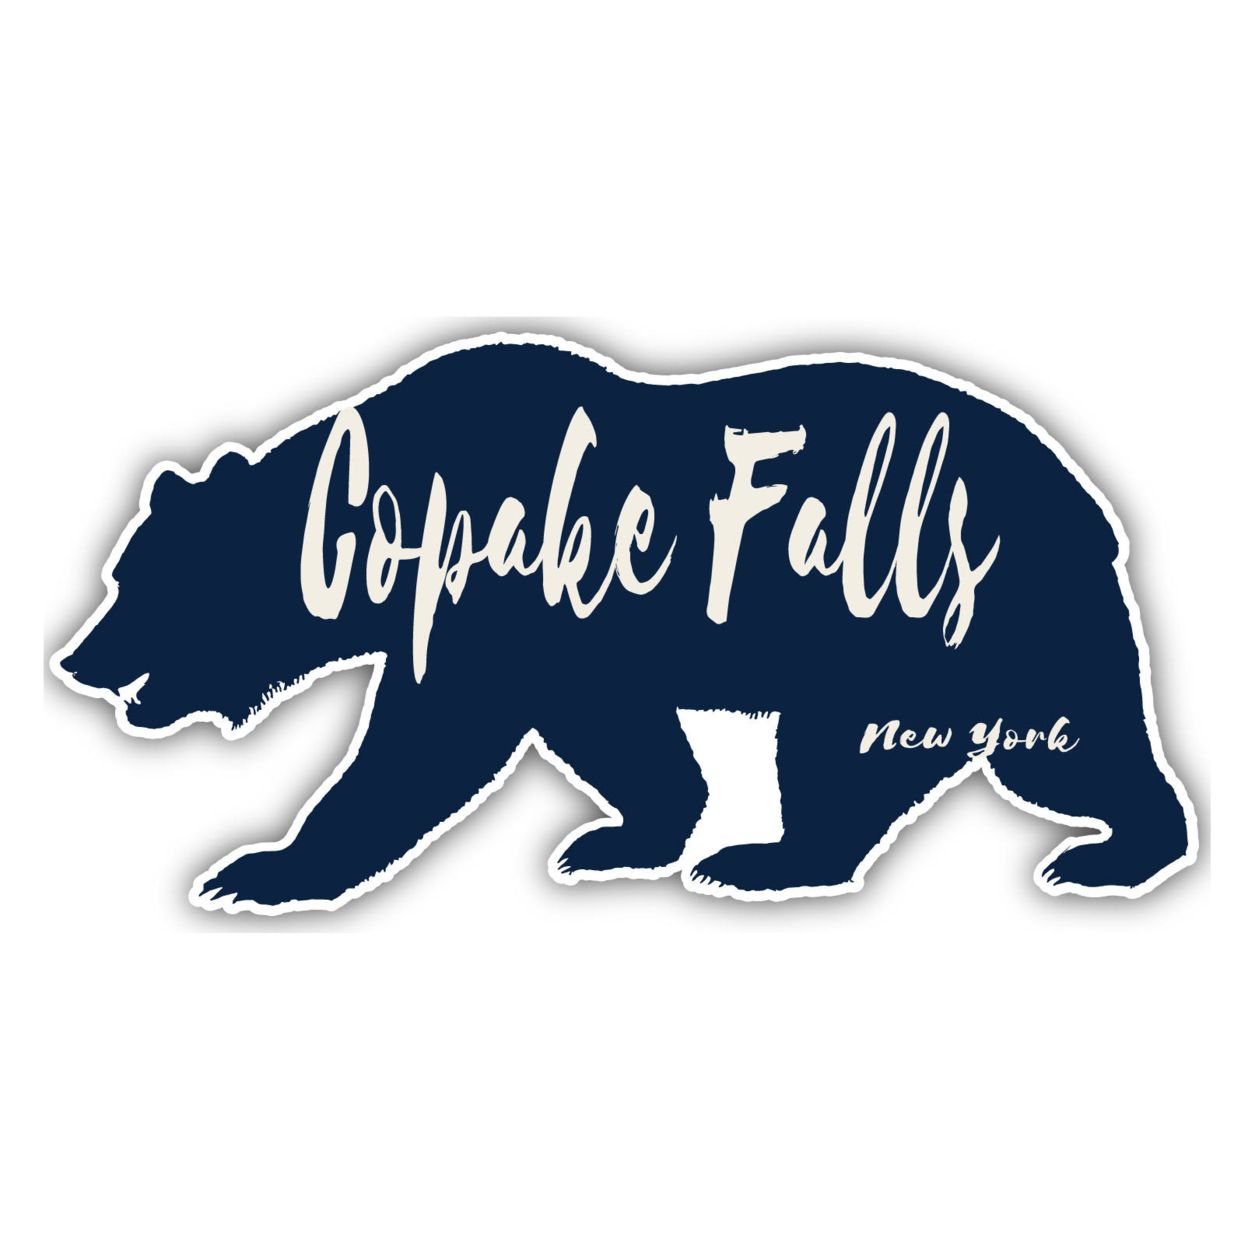 Copake Falls New York Souvenir Decorative Stickers (Choose Theme And Size) - 4-Pack, 10-Inch, Bear